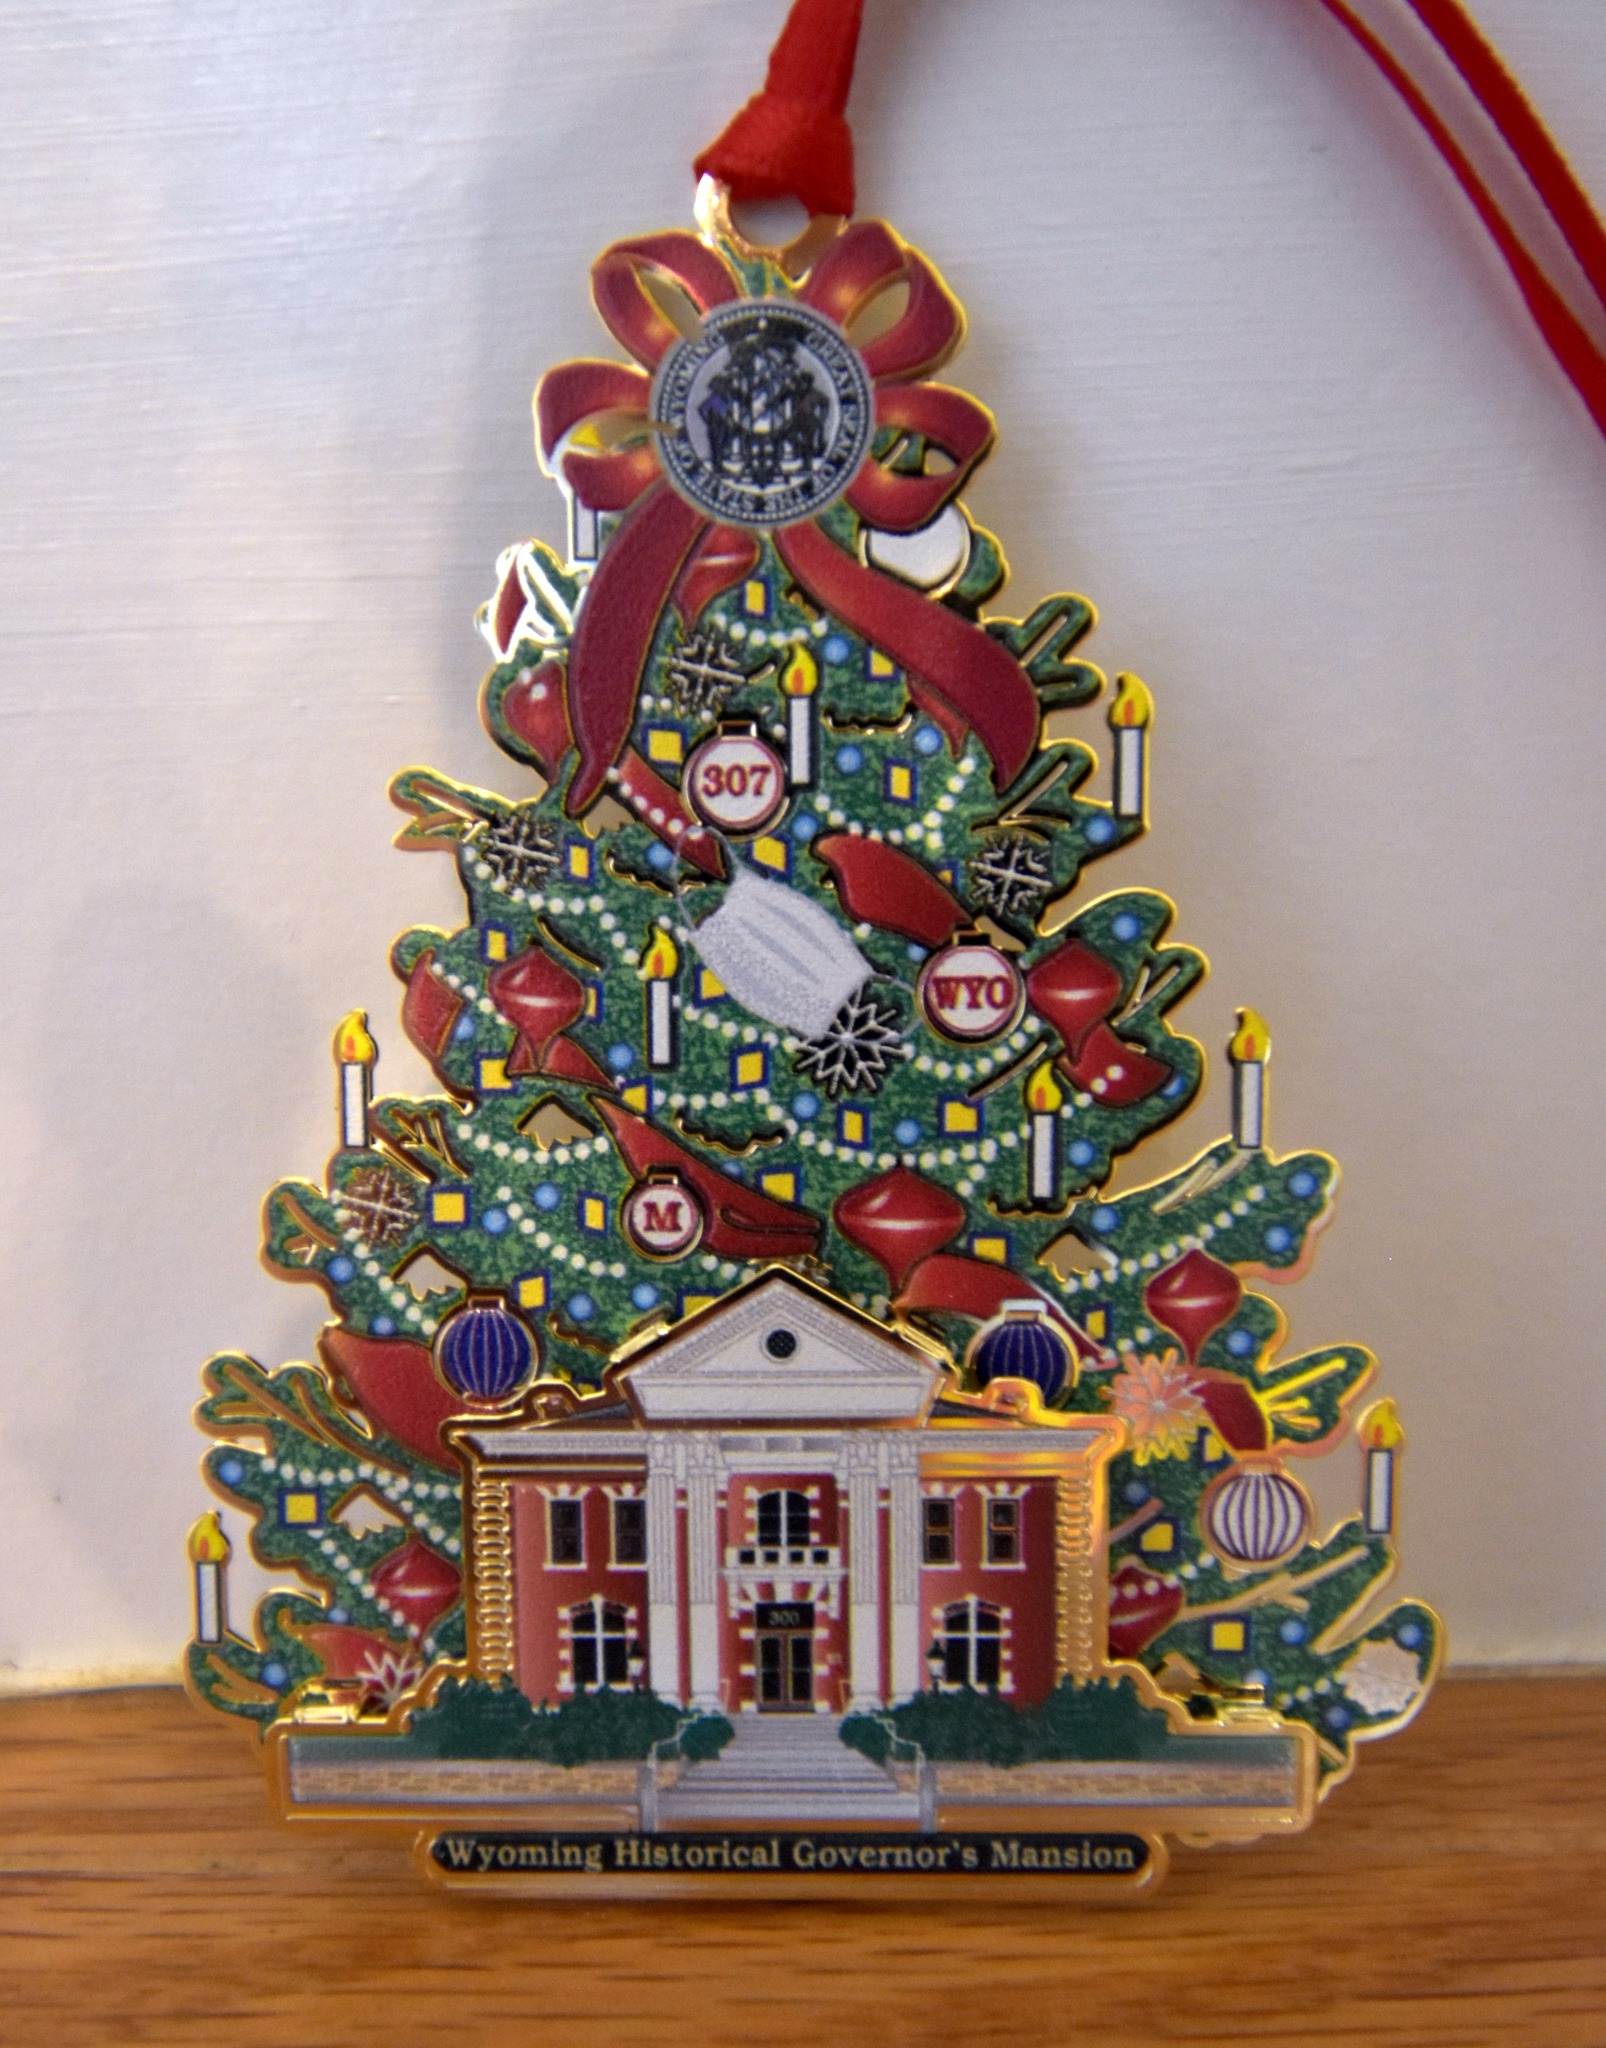 Purchase a Limited-Edition Historic Governor's Mansion Ornament